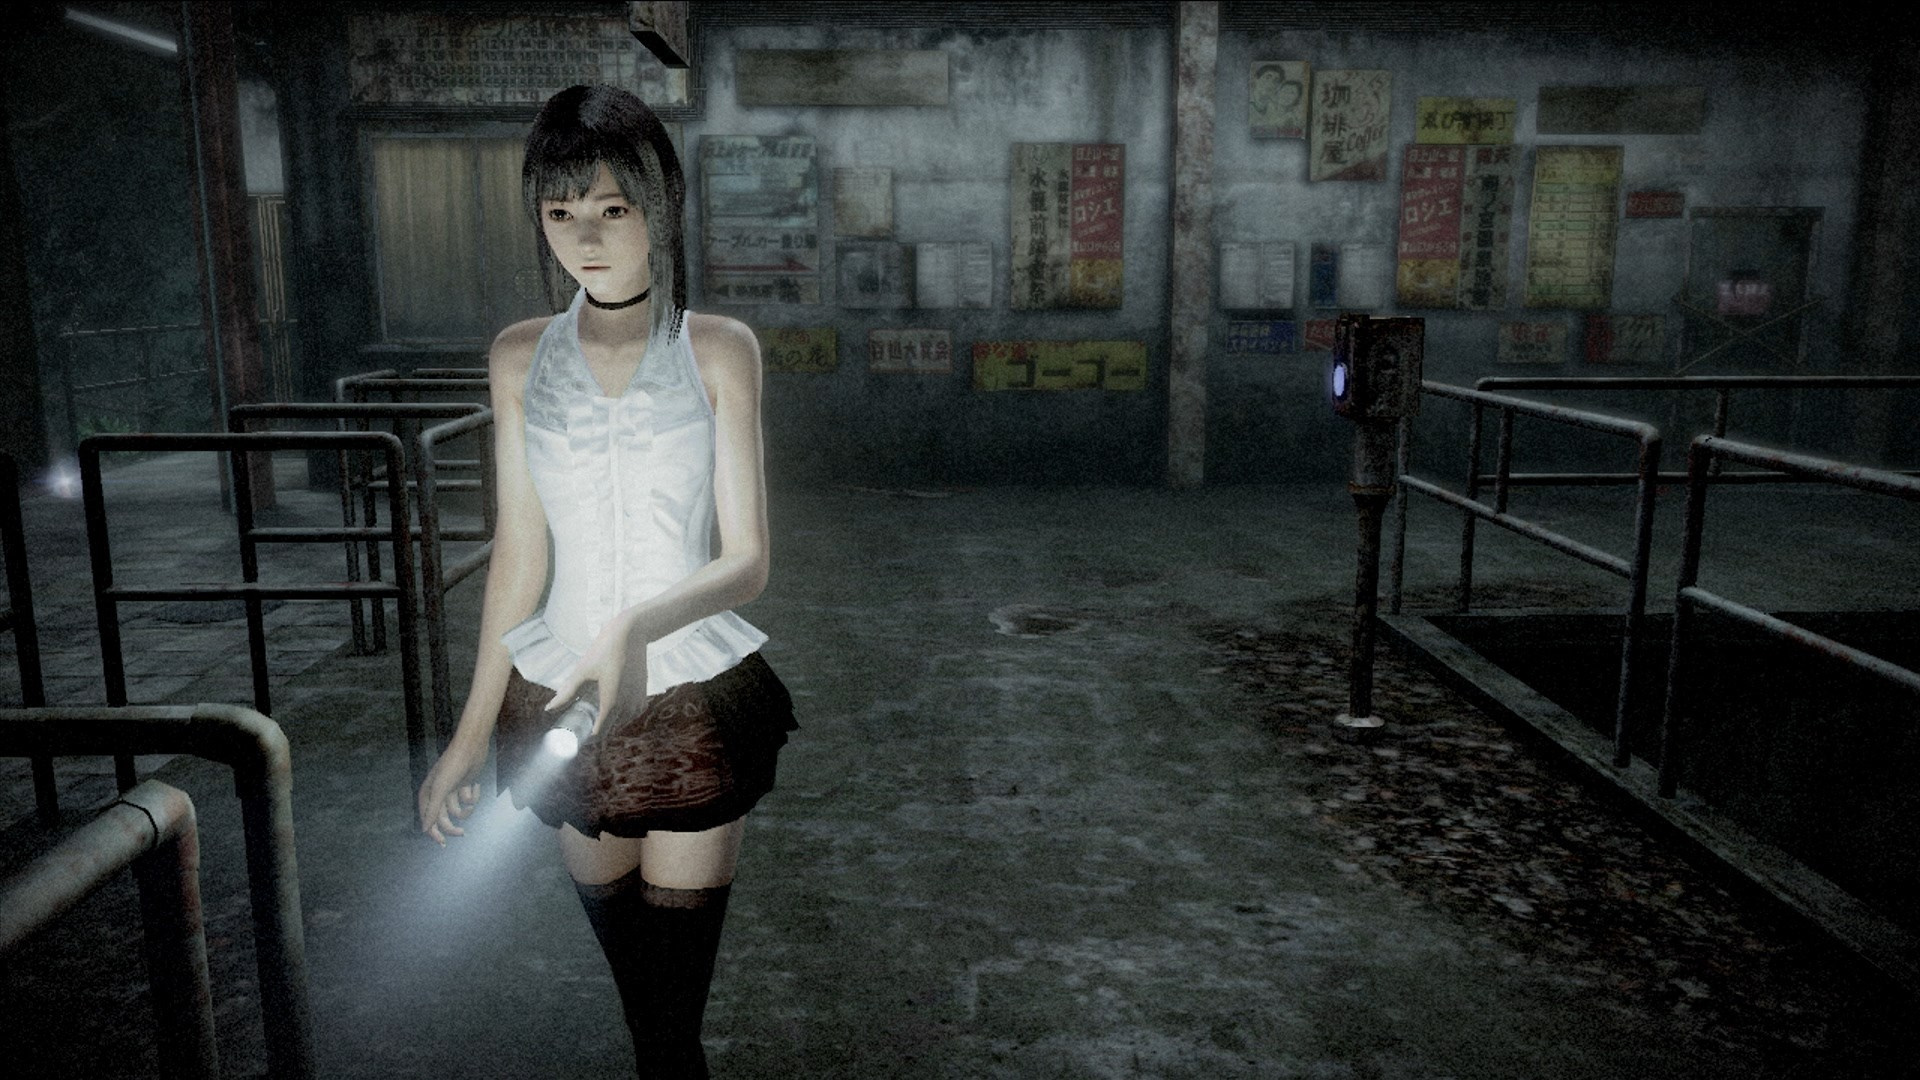 download free fatal frame project zero maiden of black